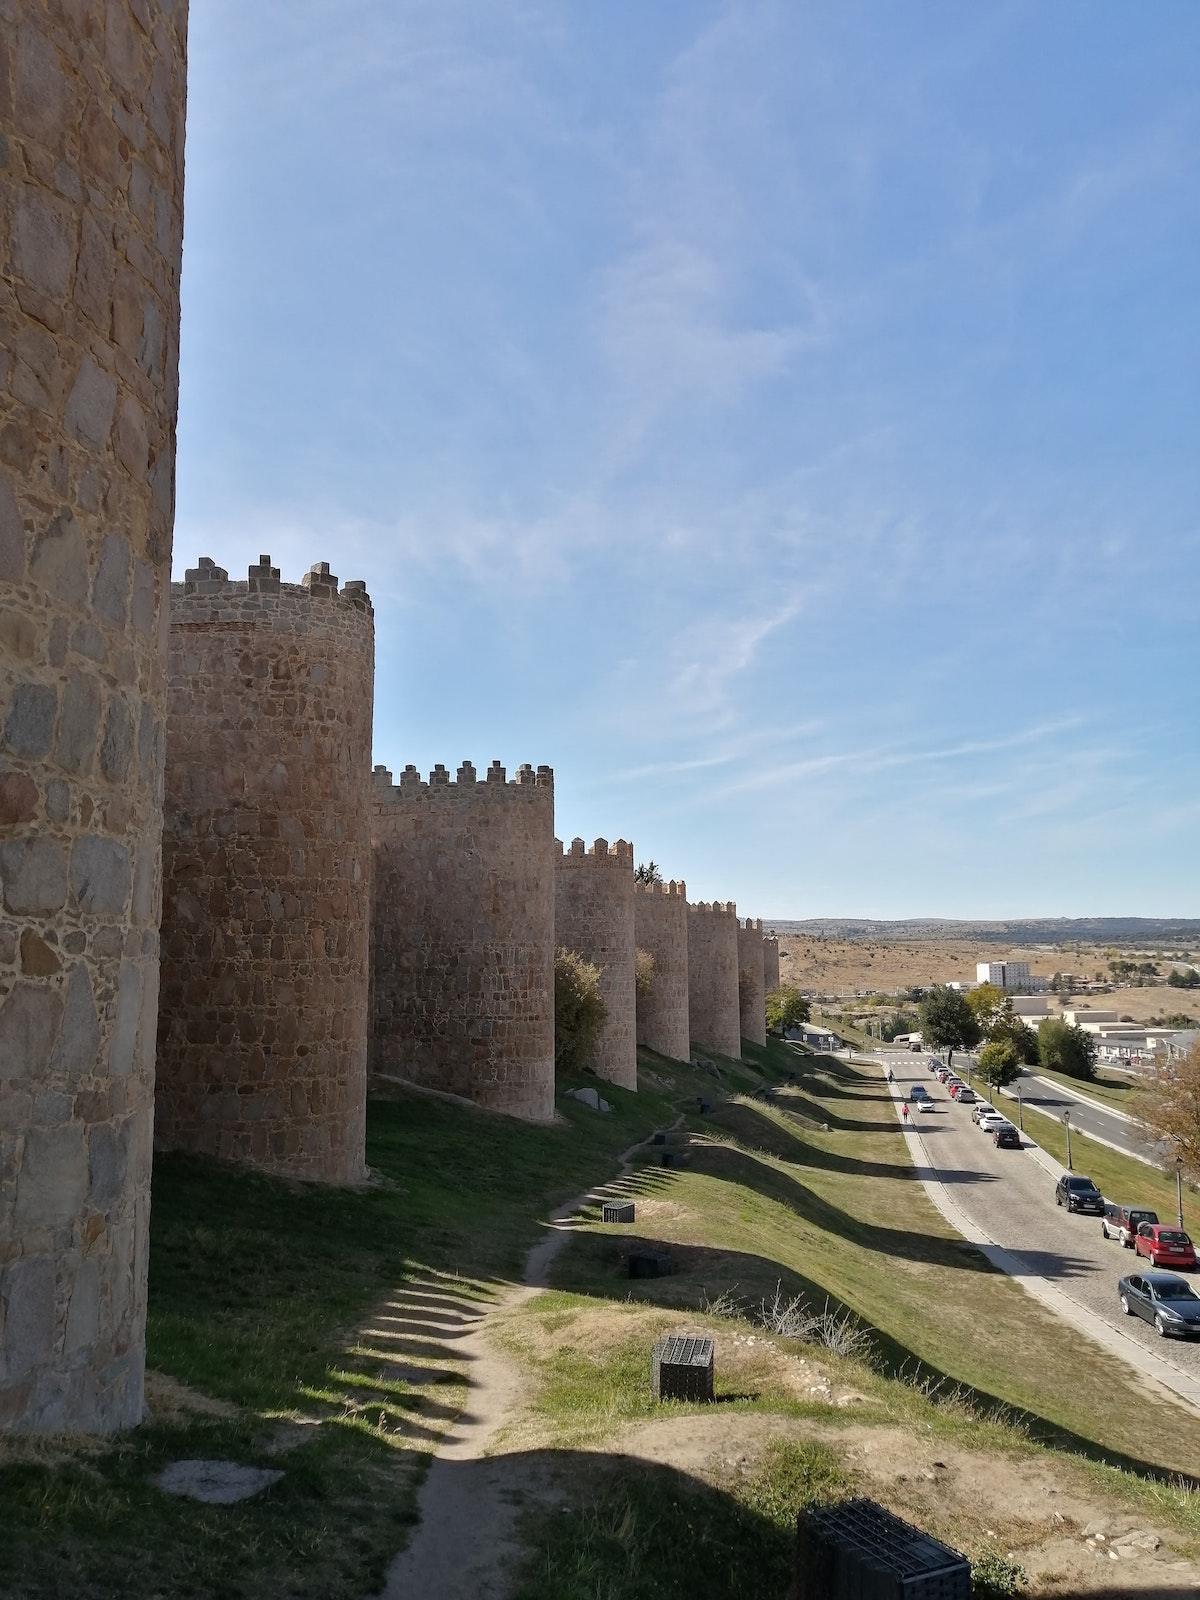 Exterior view of medieval-era city walls in Spain.